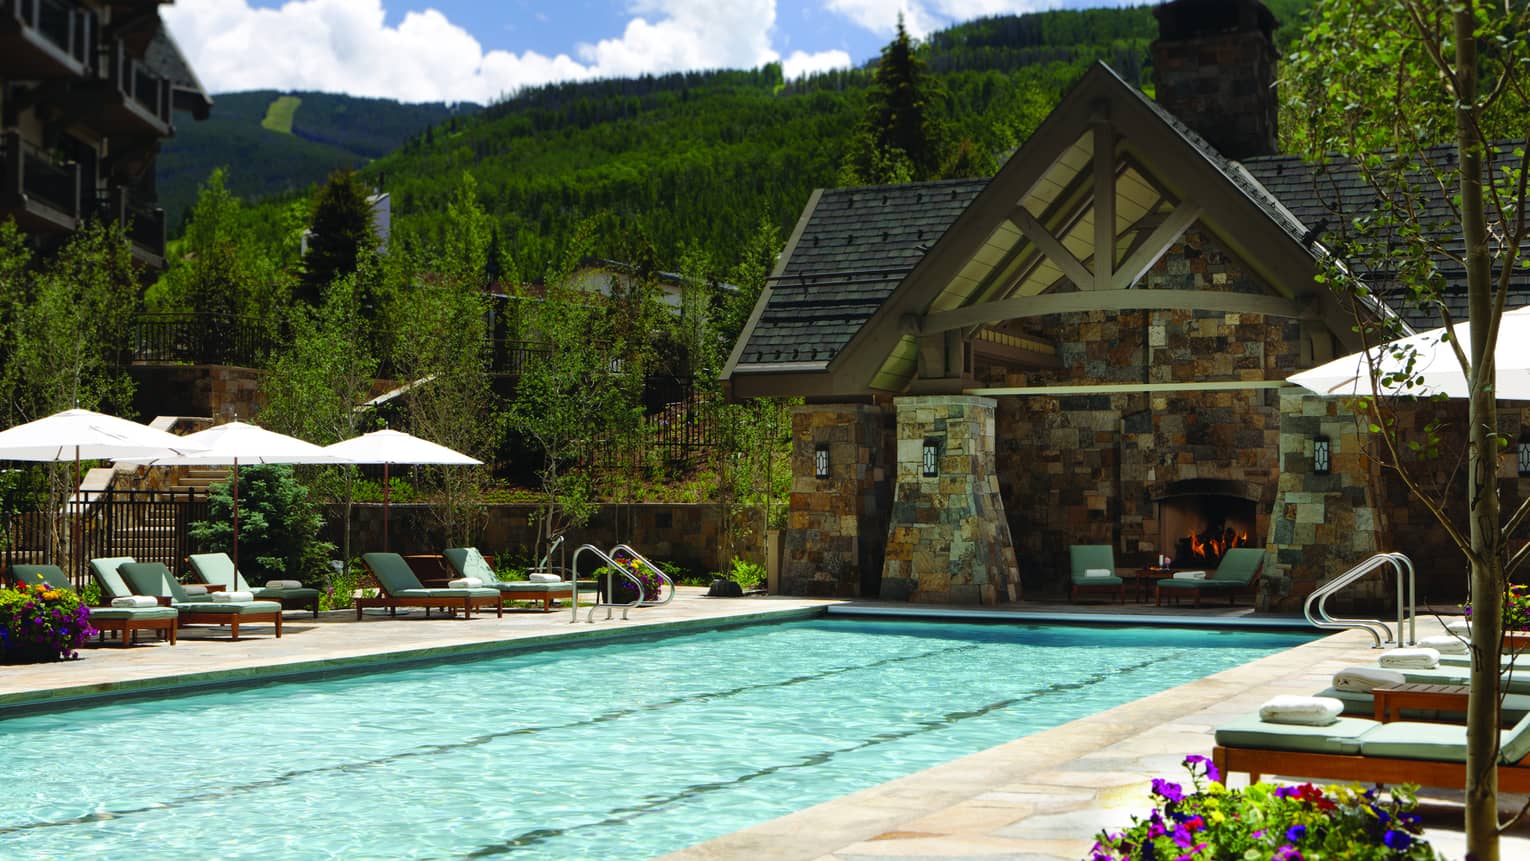 Outdoor lap pool at Four Seasons Resort Vail, lined with lounge chairs